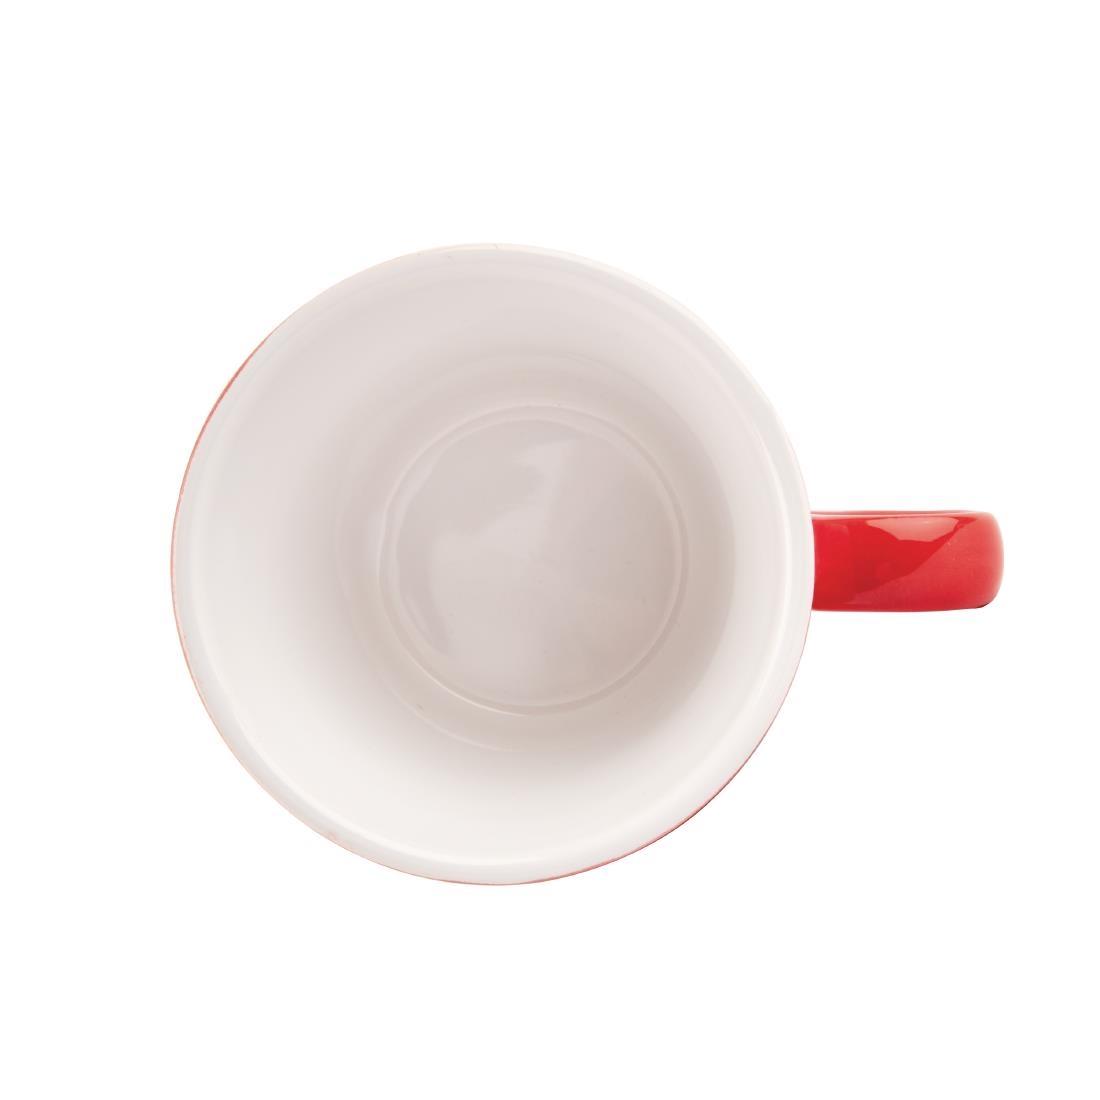 Olympia Café Aroma Mugs Red 340ml (Pack of 6) - DH632  - 3